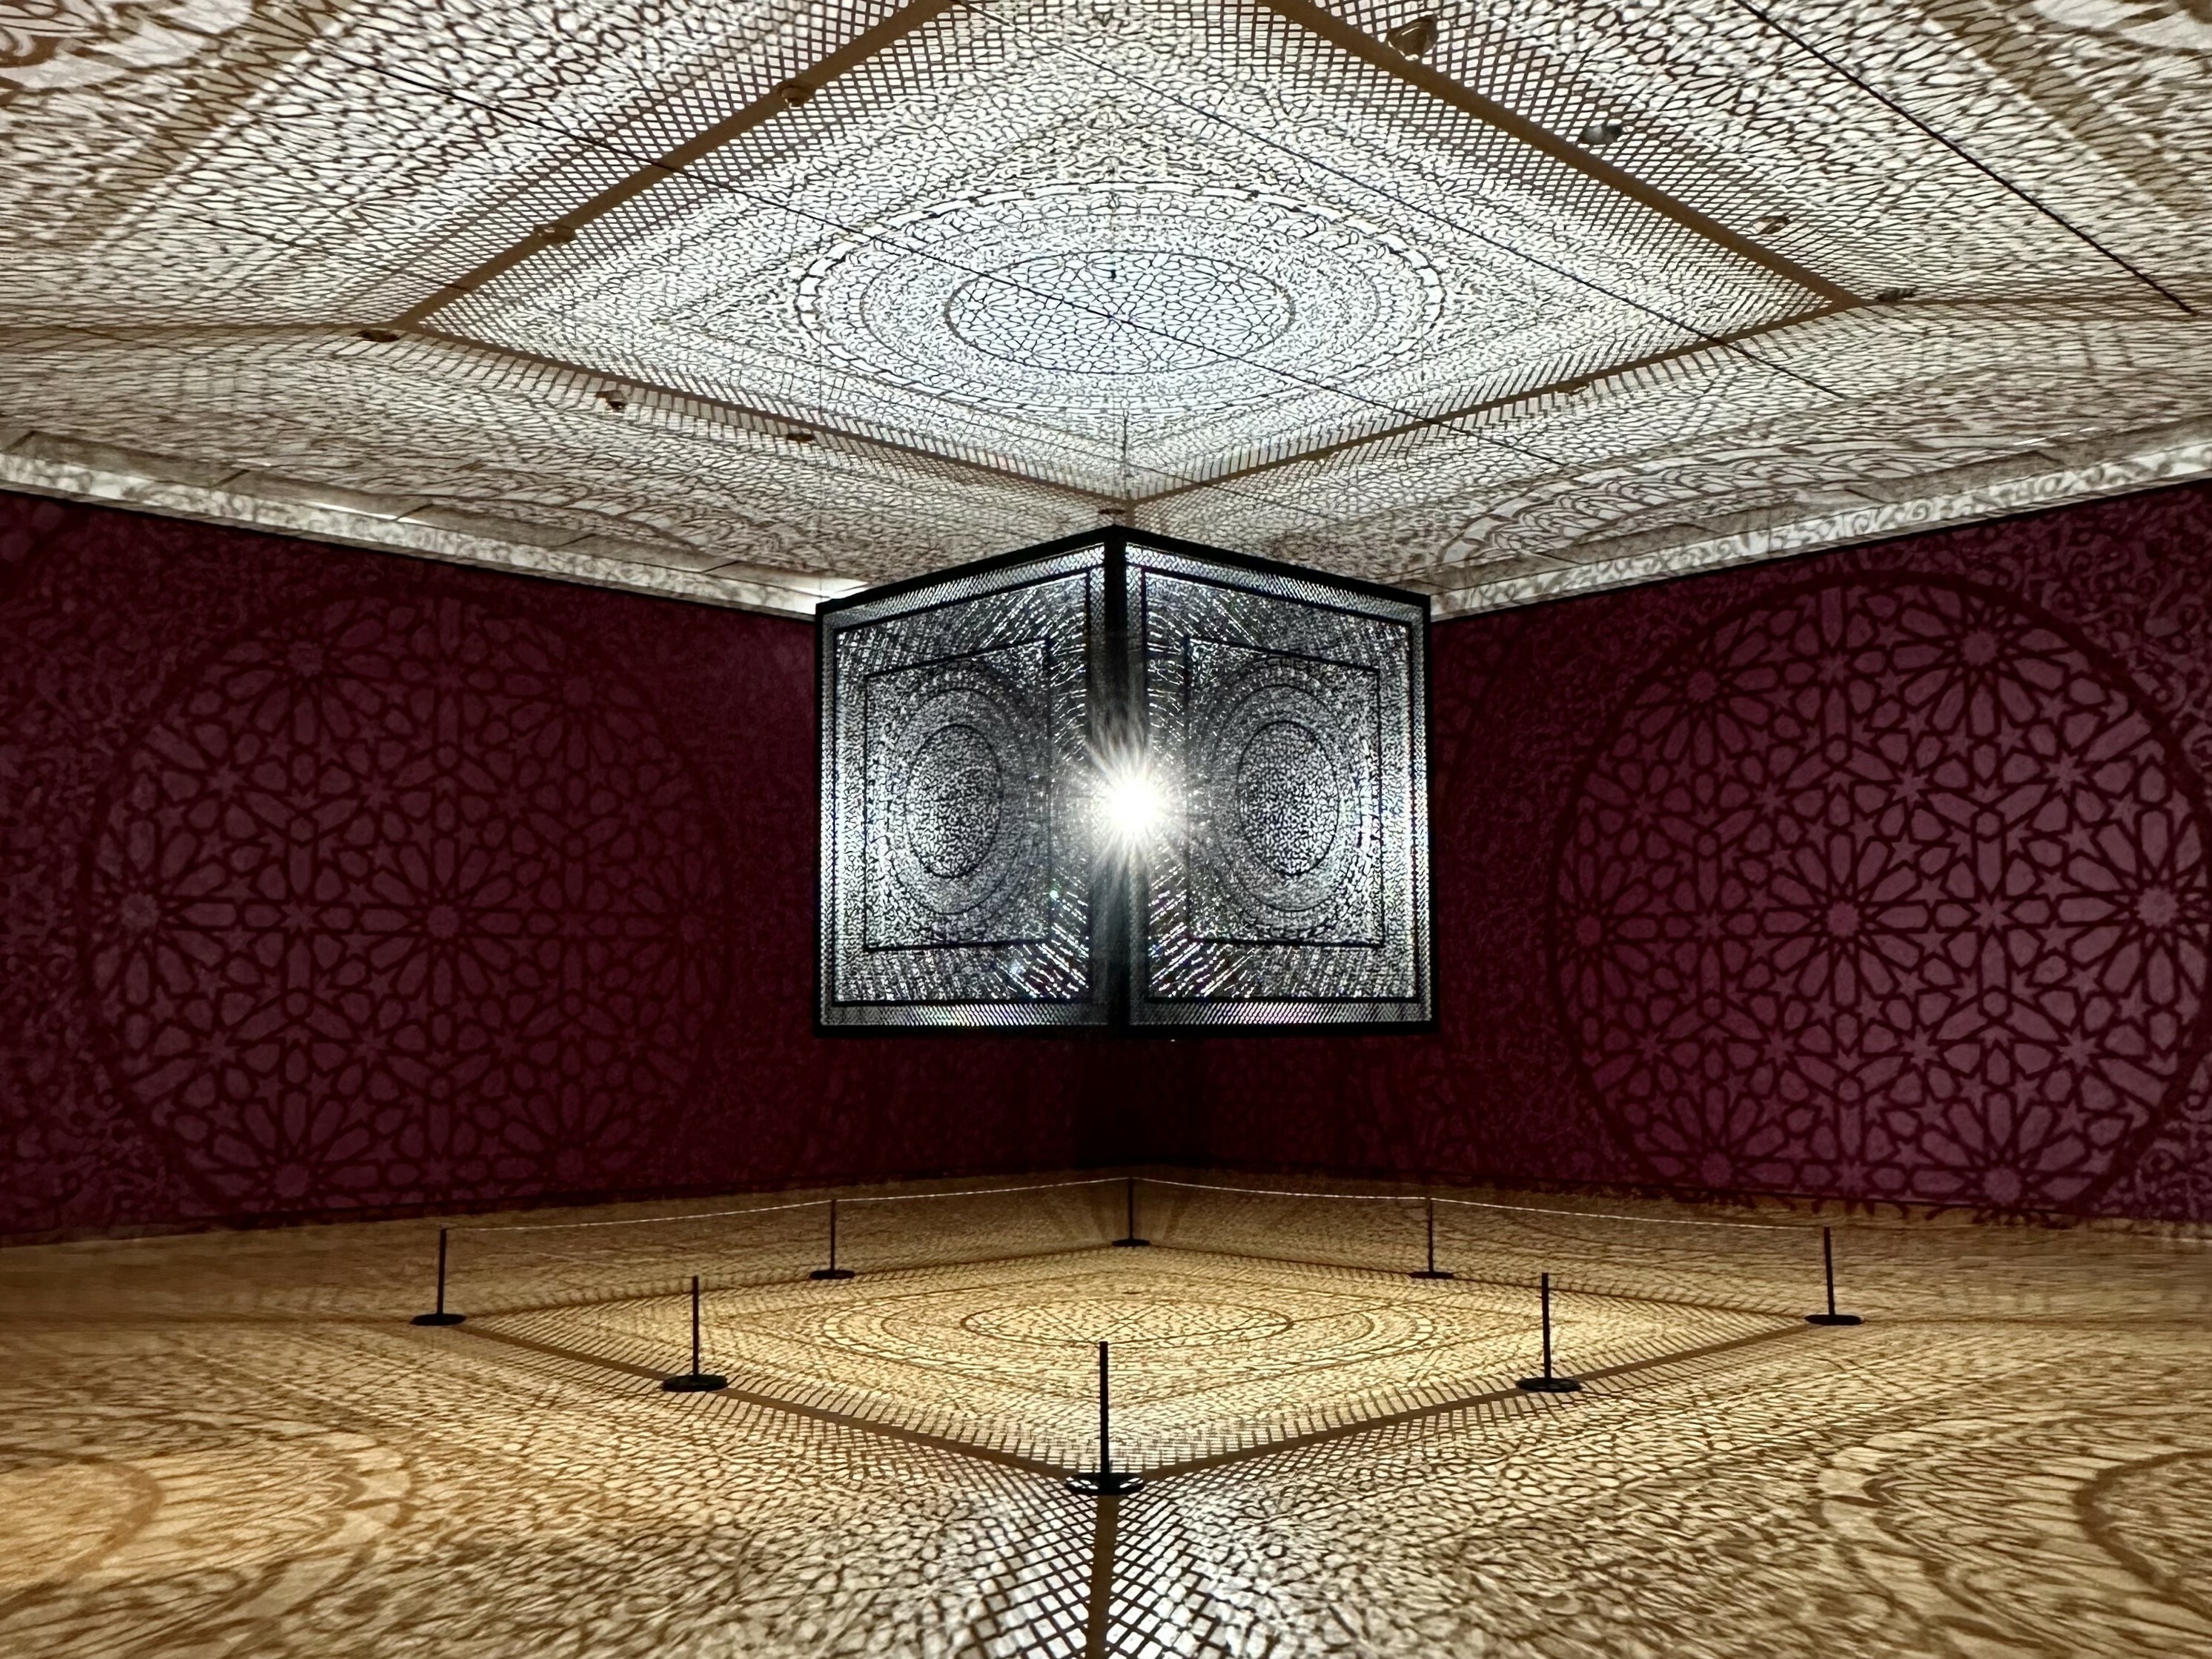 Anila Quayyum Agha, "Intersections," 2013, Lacquered steel and halogen bulb, 78" x 78" x 78"